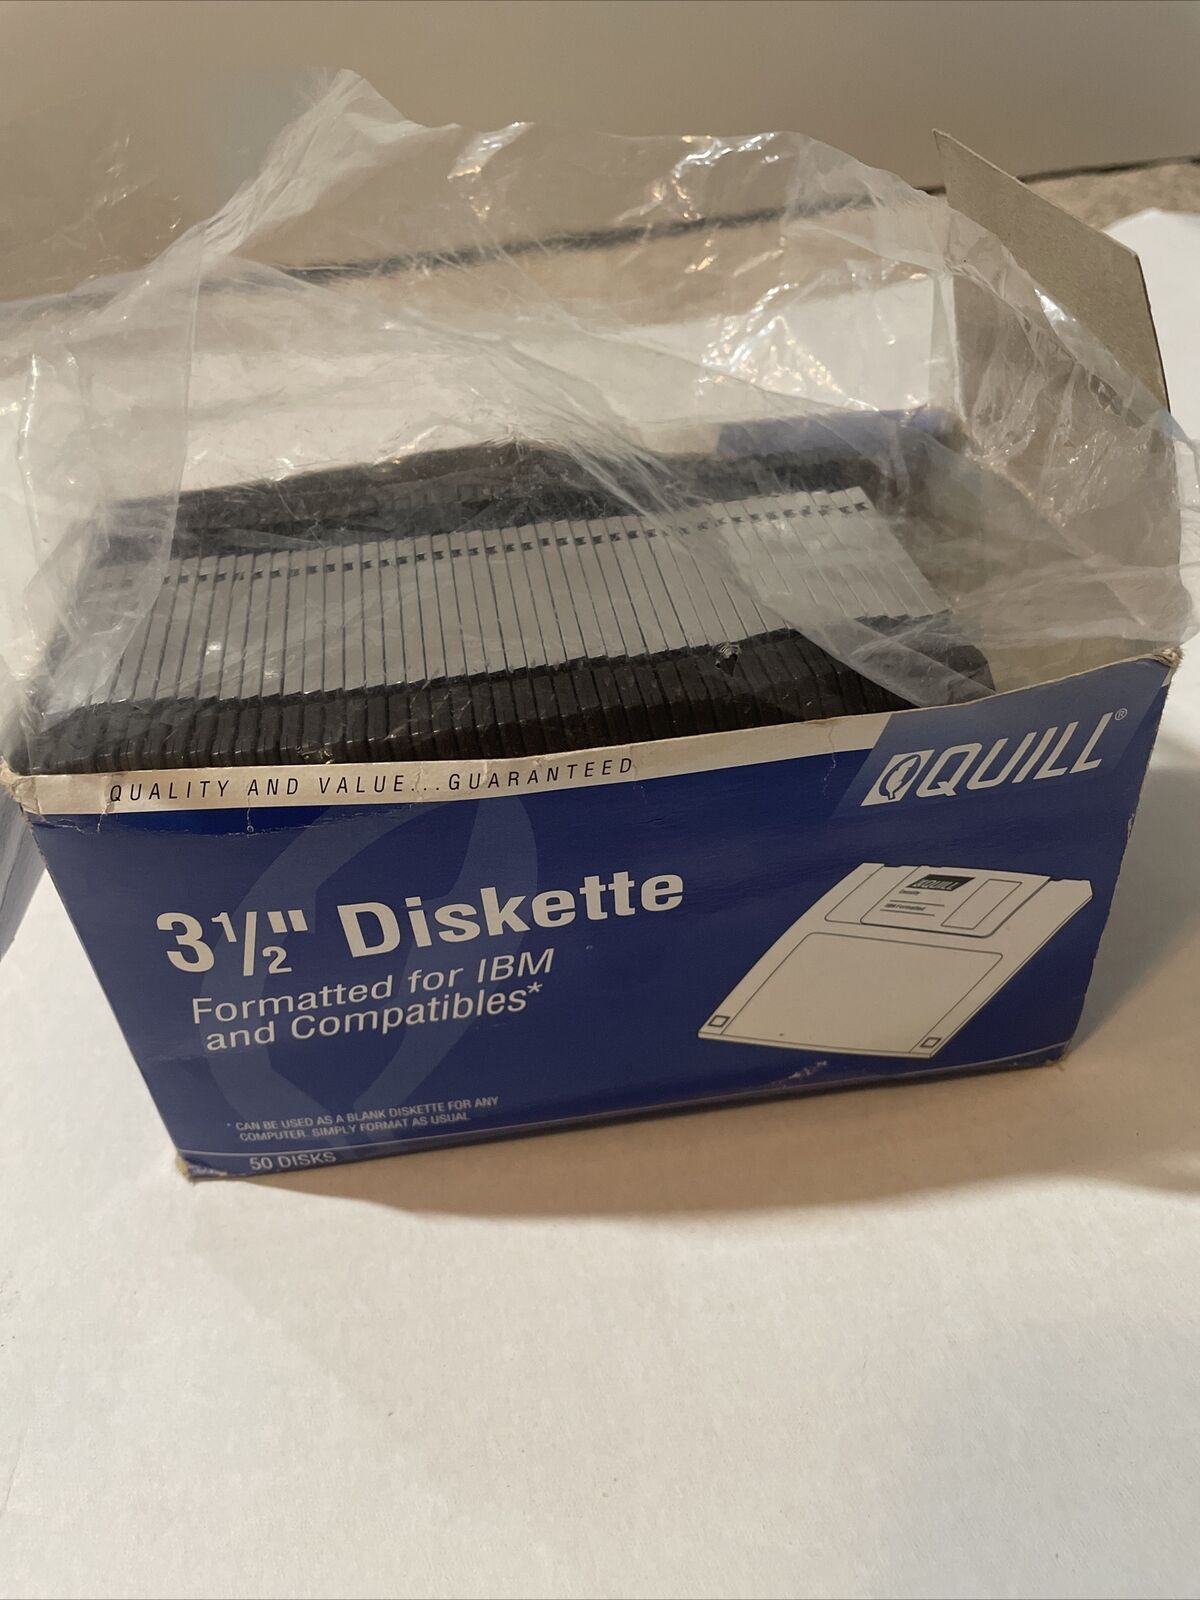 Quill 3.5” HD 1.44MB Diskettes - Lot of 44 - IBM Formatted - Black - NOS